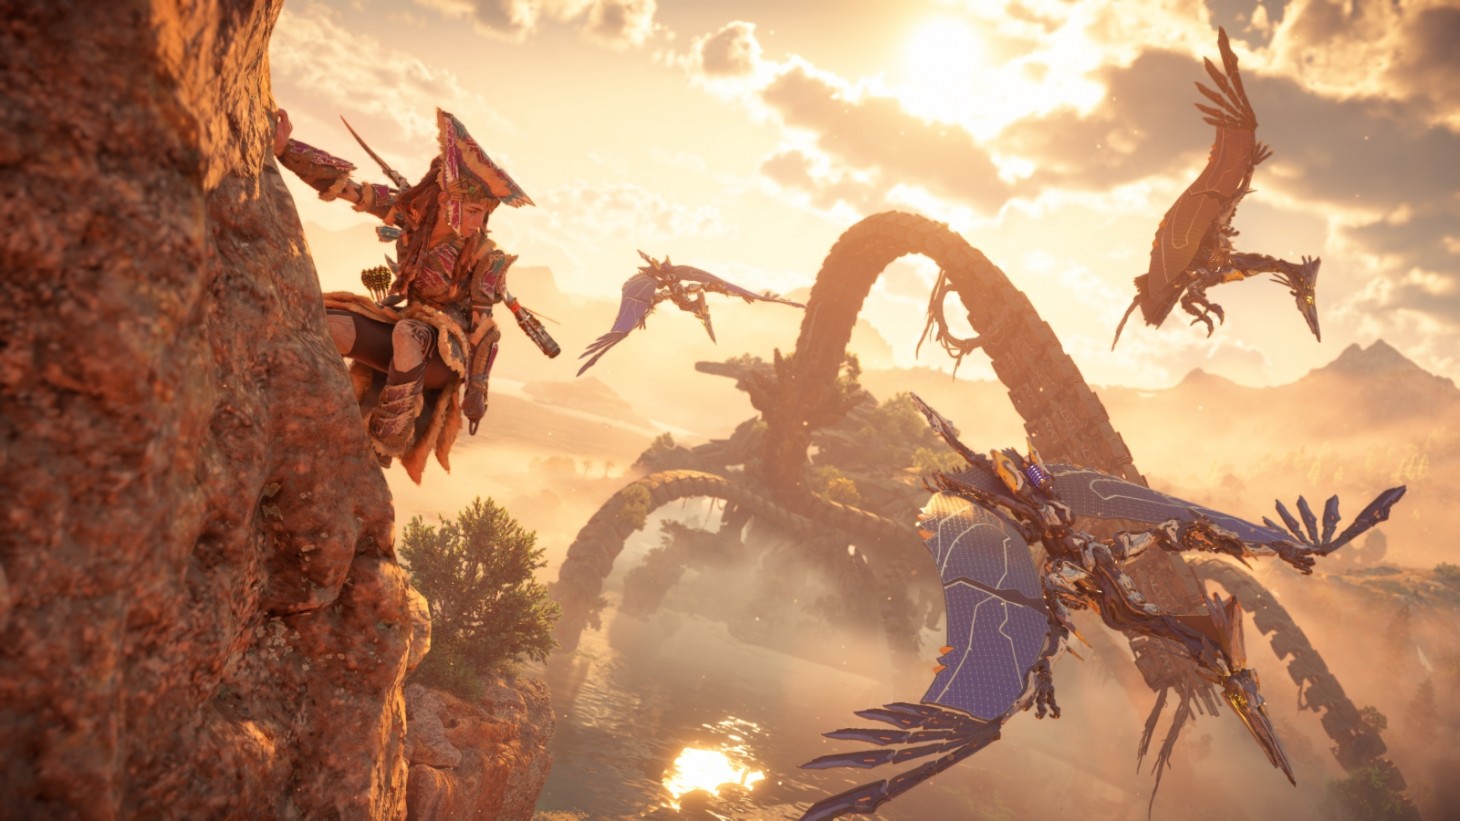 Horizon Forbidden West DLC Requires You to Beat The Base Story